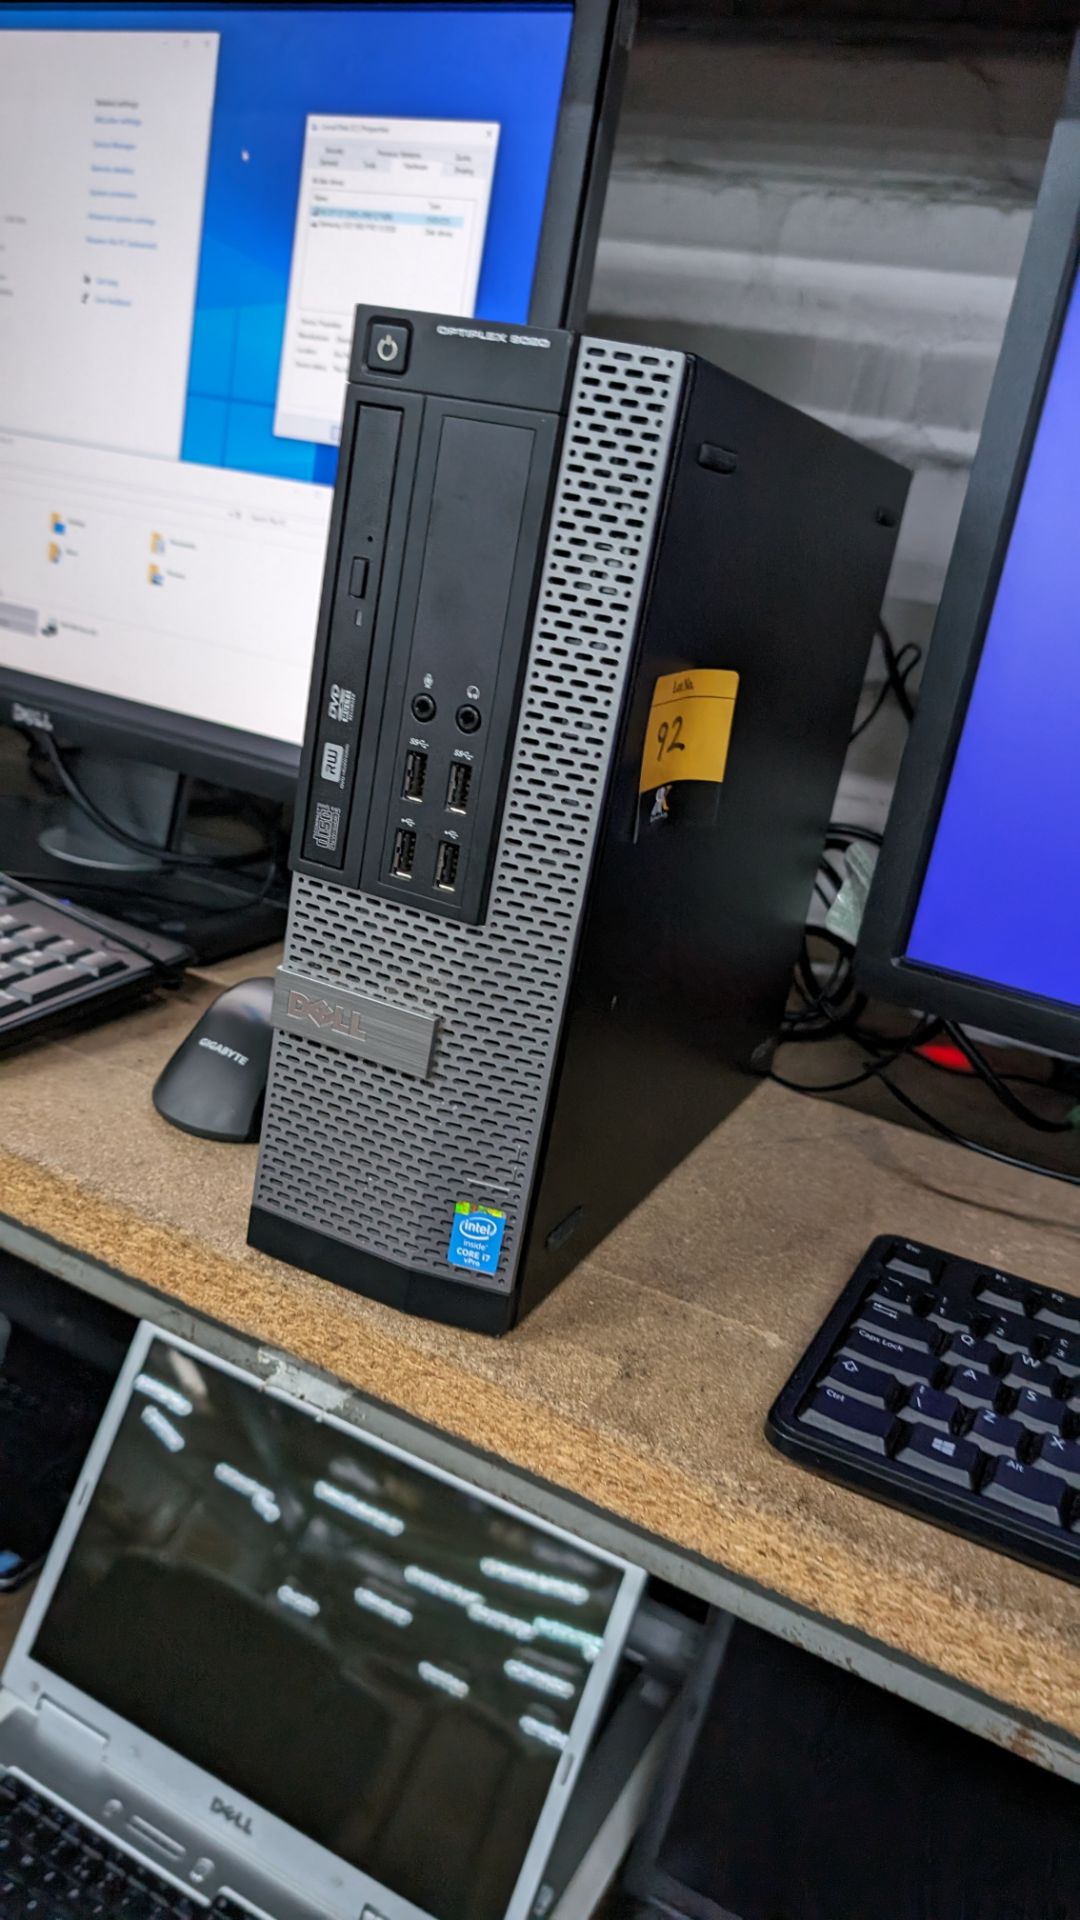 Dell Optiplex 9020 compact tower computer with Intel i7 vPro processor, including widescreen monitor - Image 6 of 18